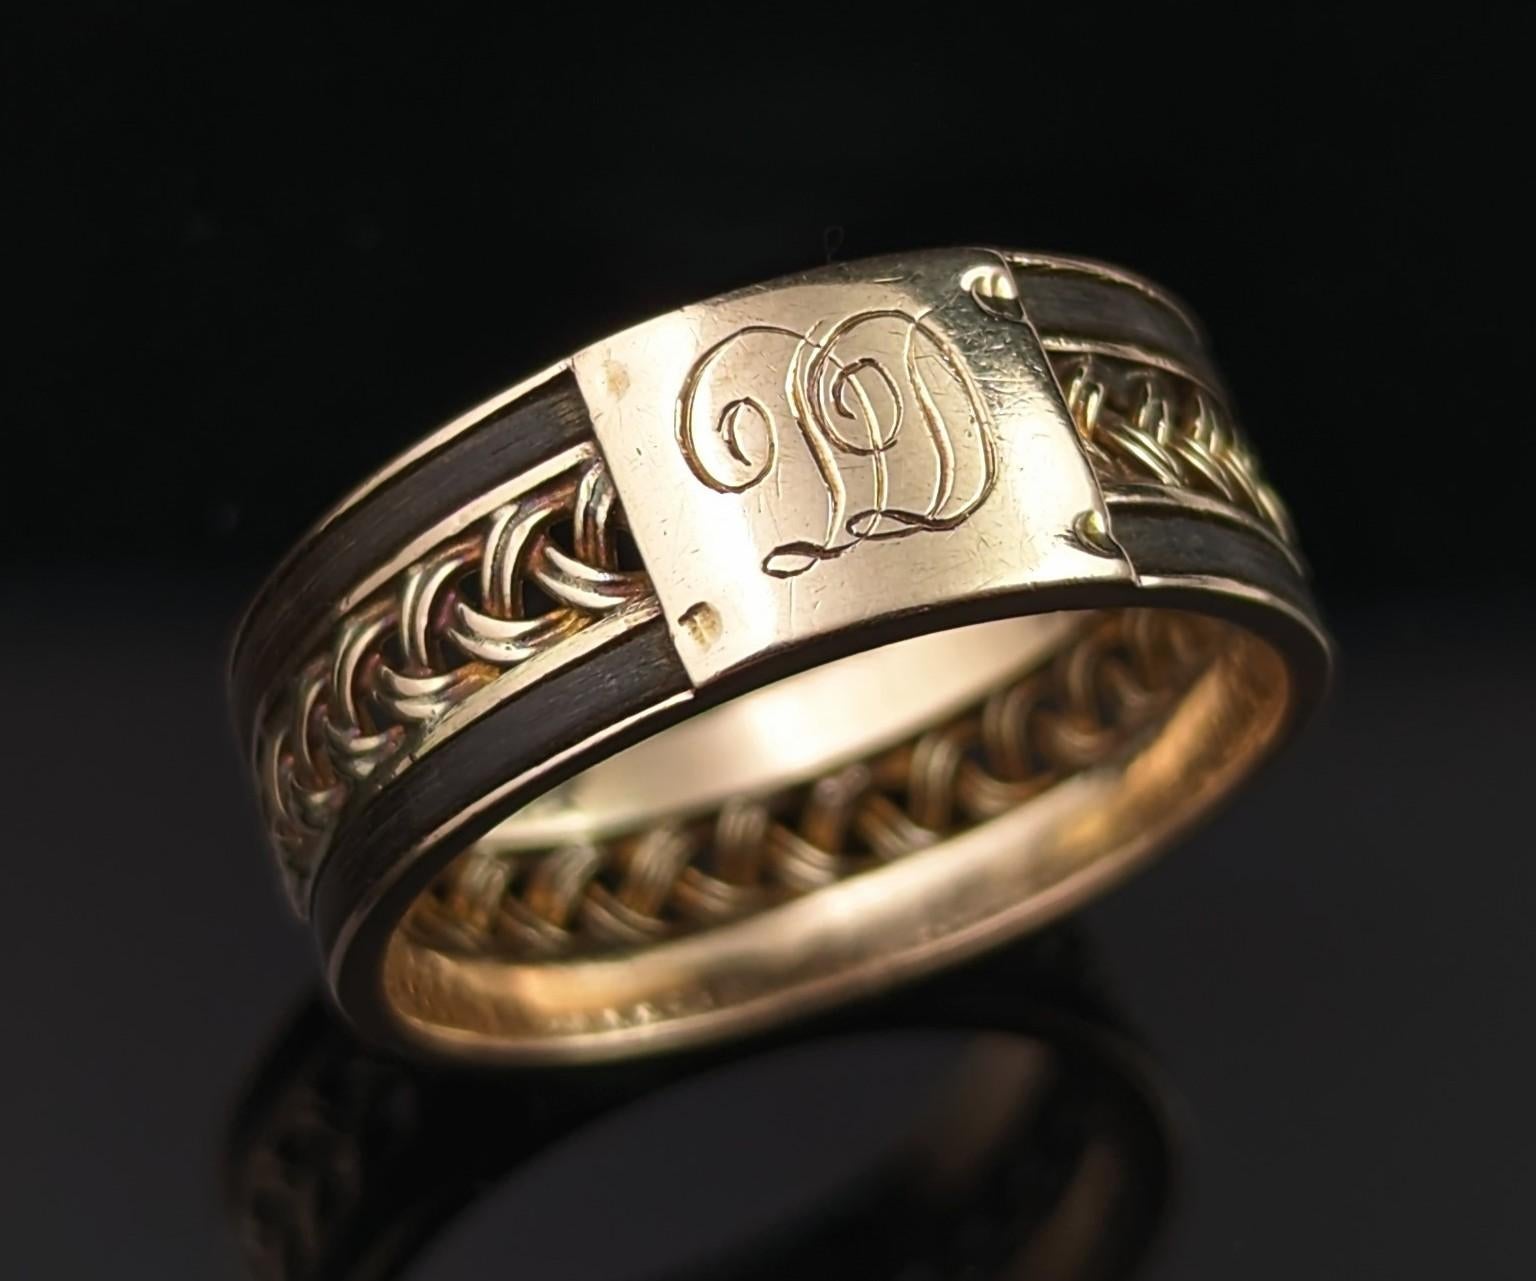 This antique Raj era plaited 14kt gold band ring really is staggeringly beautiful!

Whilst it has the dark aesthetic of a mourning piece these Victorian beauty's were often bought home from travels and gifted as love tokens.

This is most likely a